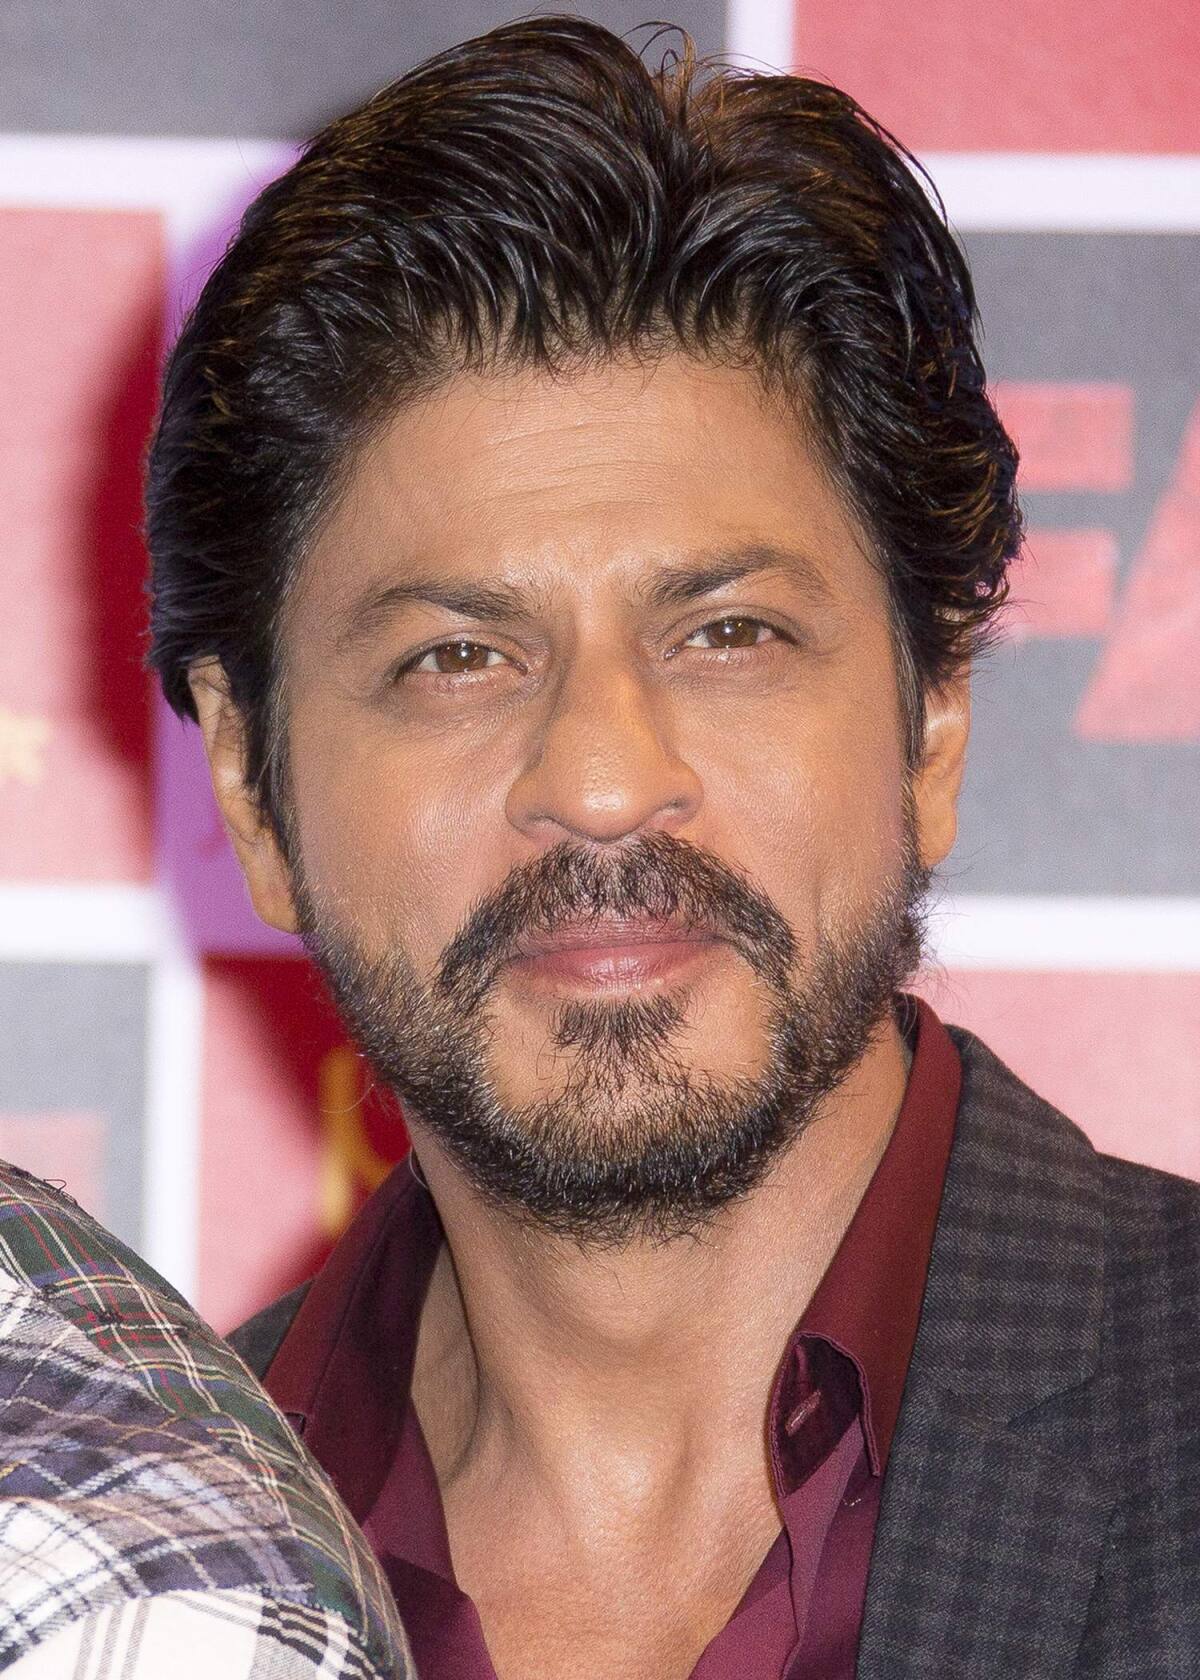 Shah Rukh Khan tops Forbes list of highest-paid in Bollywood